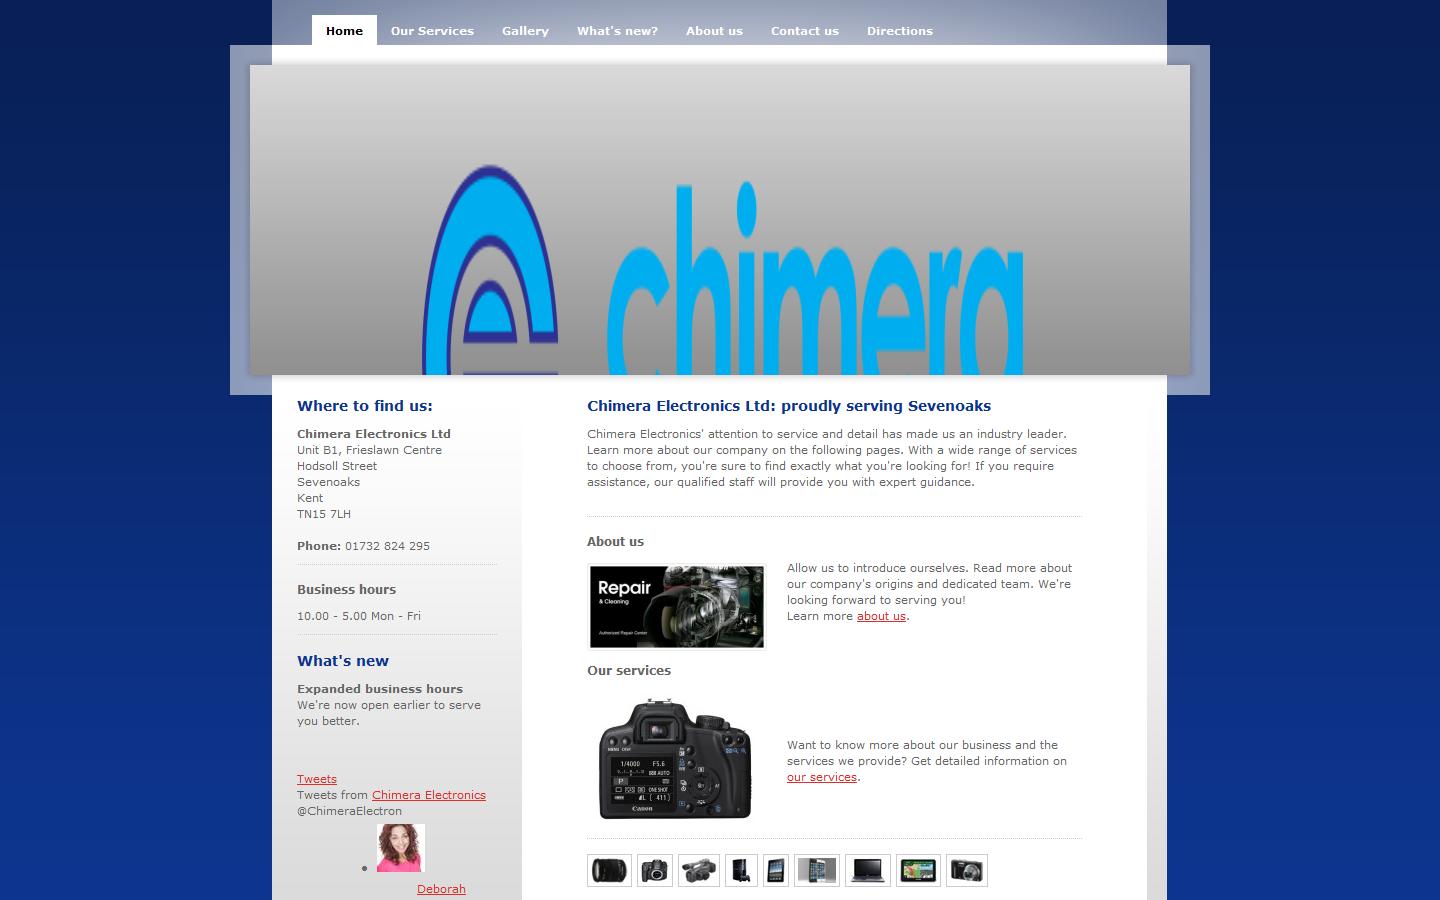 chimera mobile phone utility licence